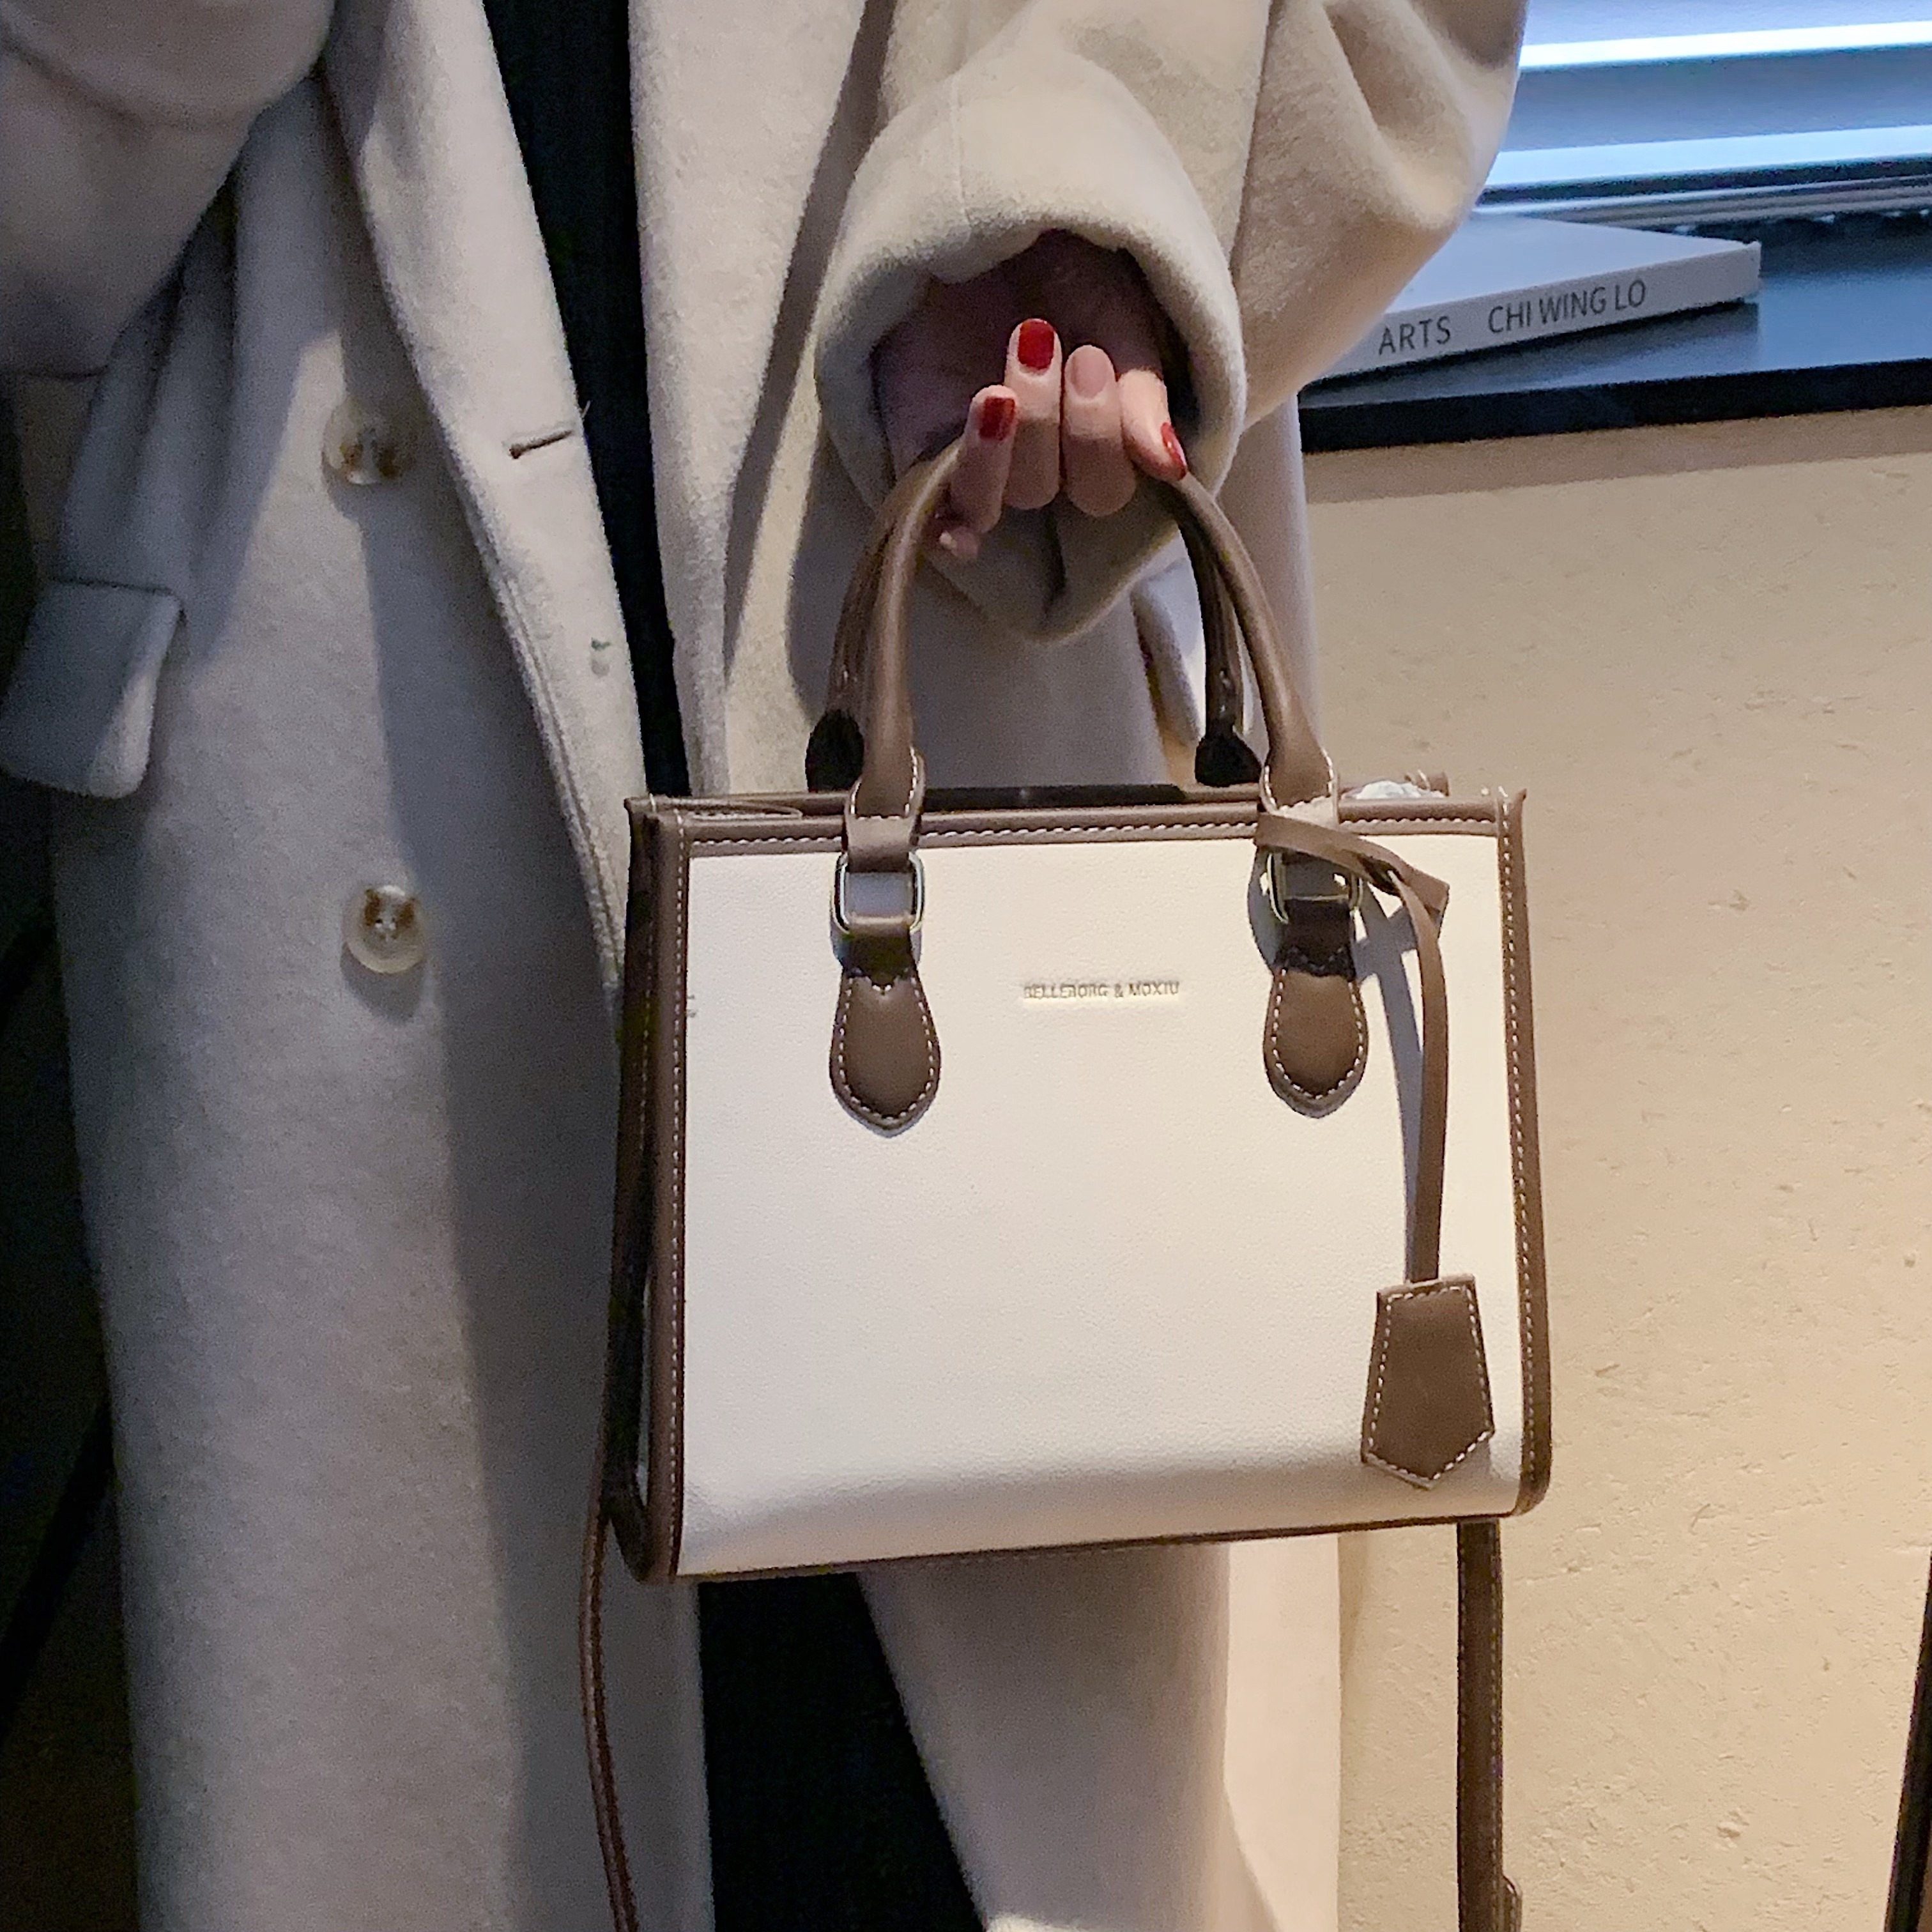 strathberry nano tote review